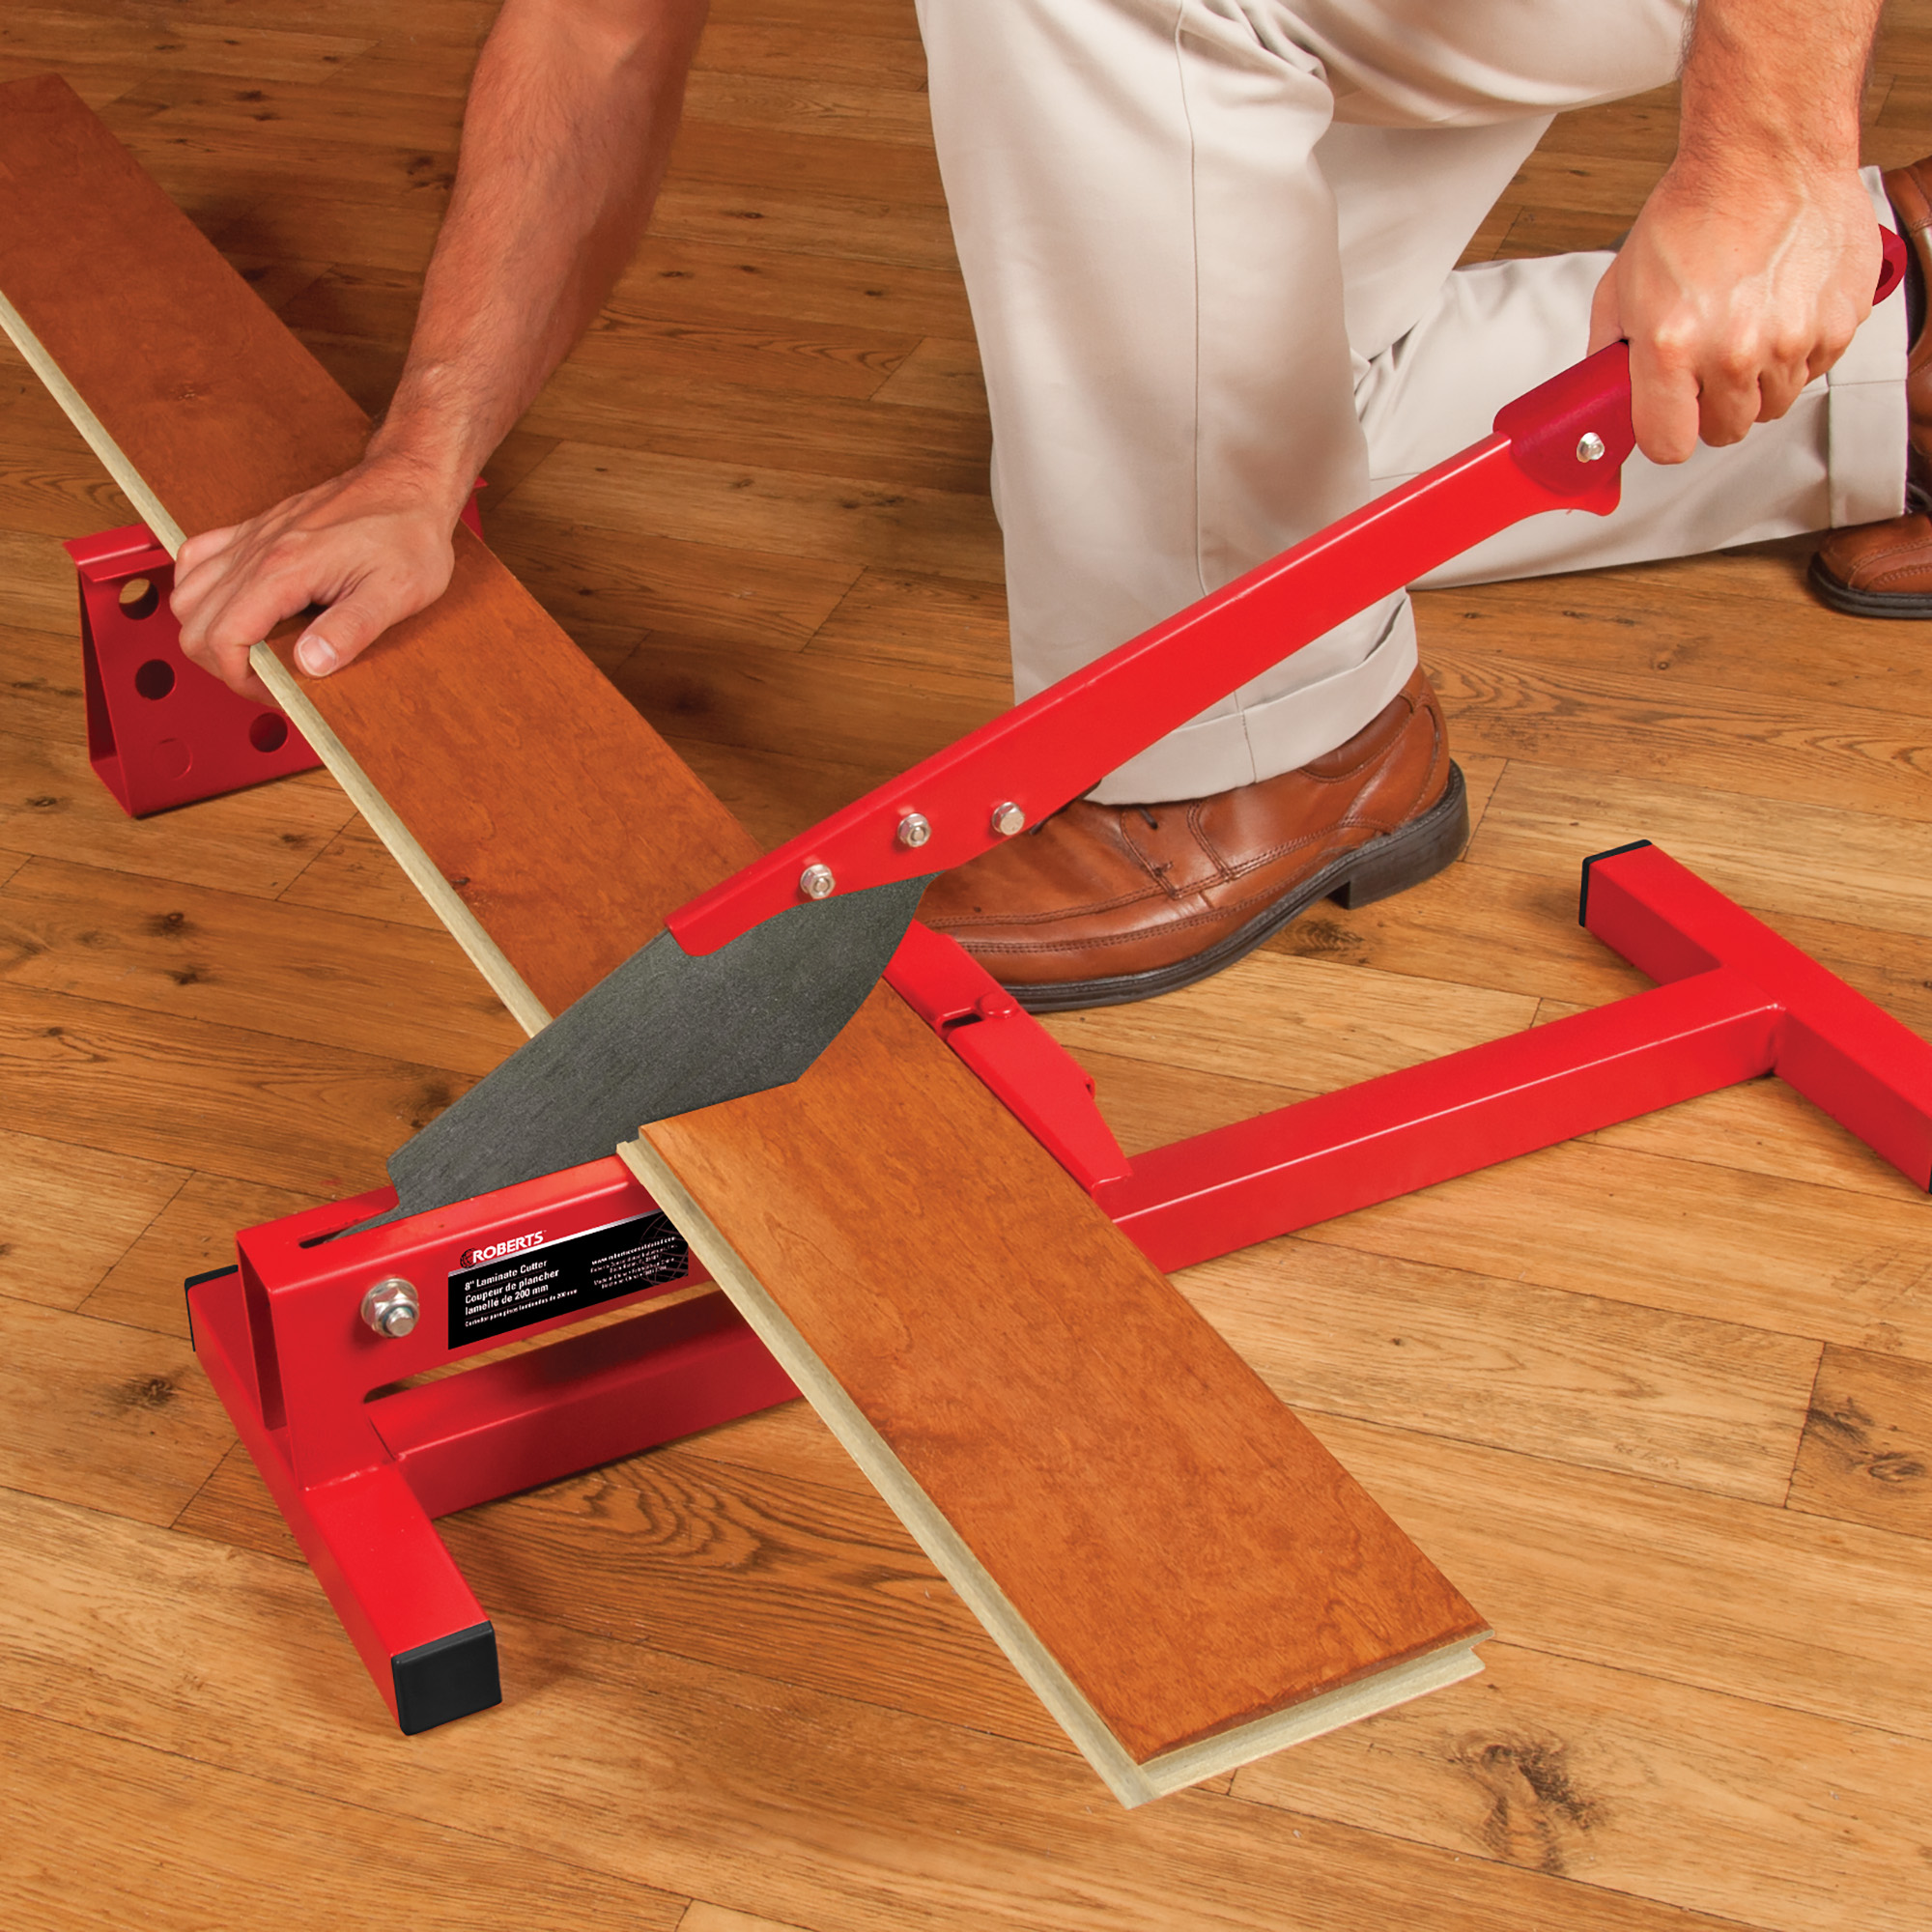 8 Laminate Cutter Roberts Consolidated, What Is The Best Saw To Use For Cutting Laminate Flooring